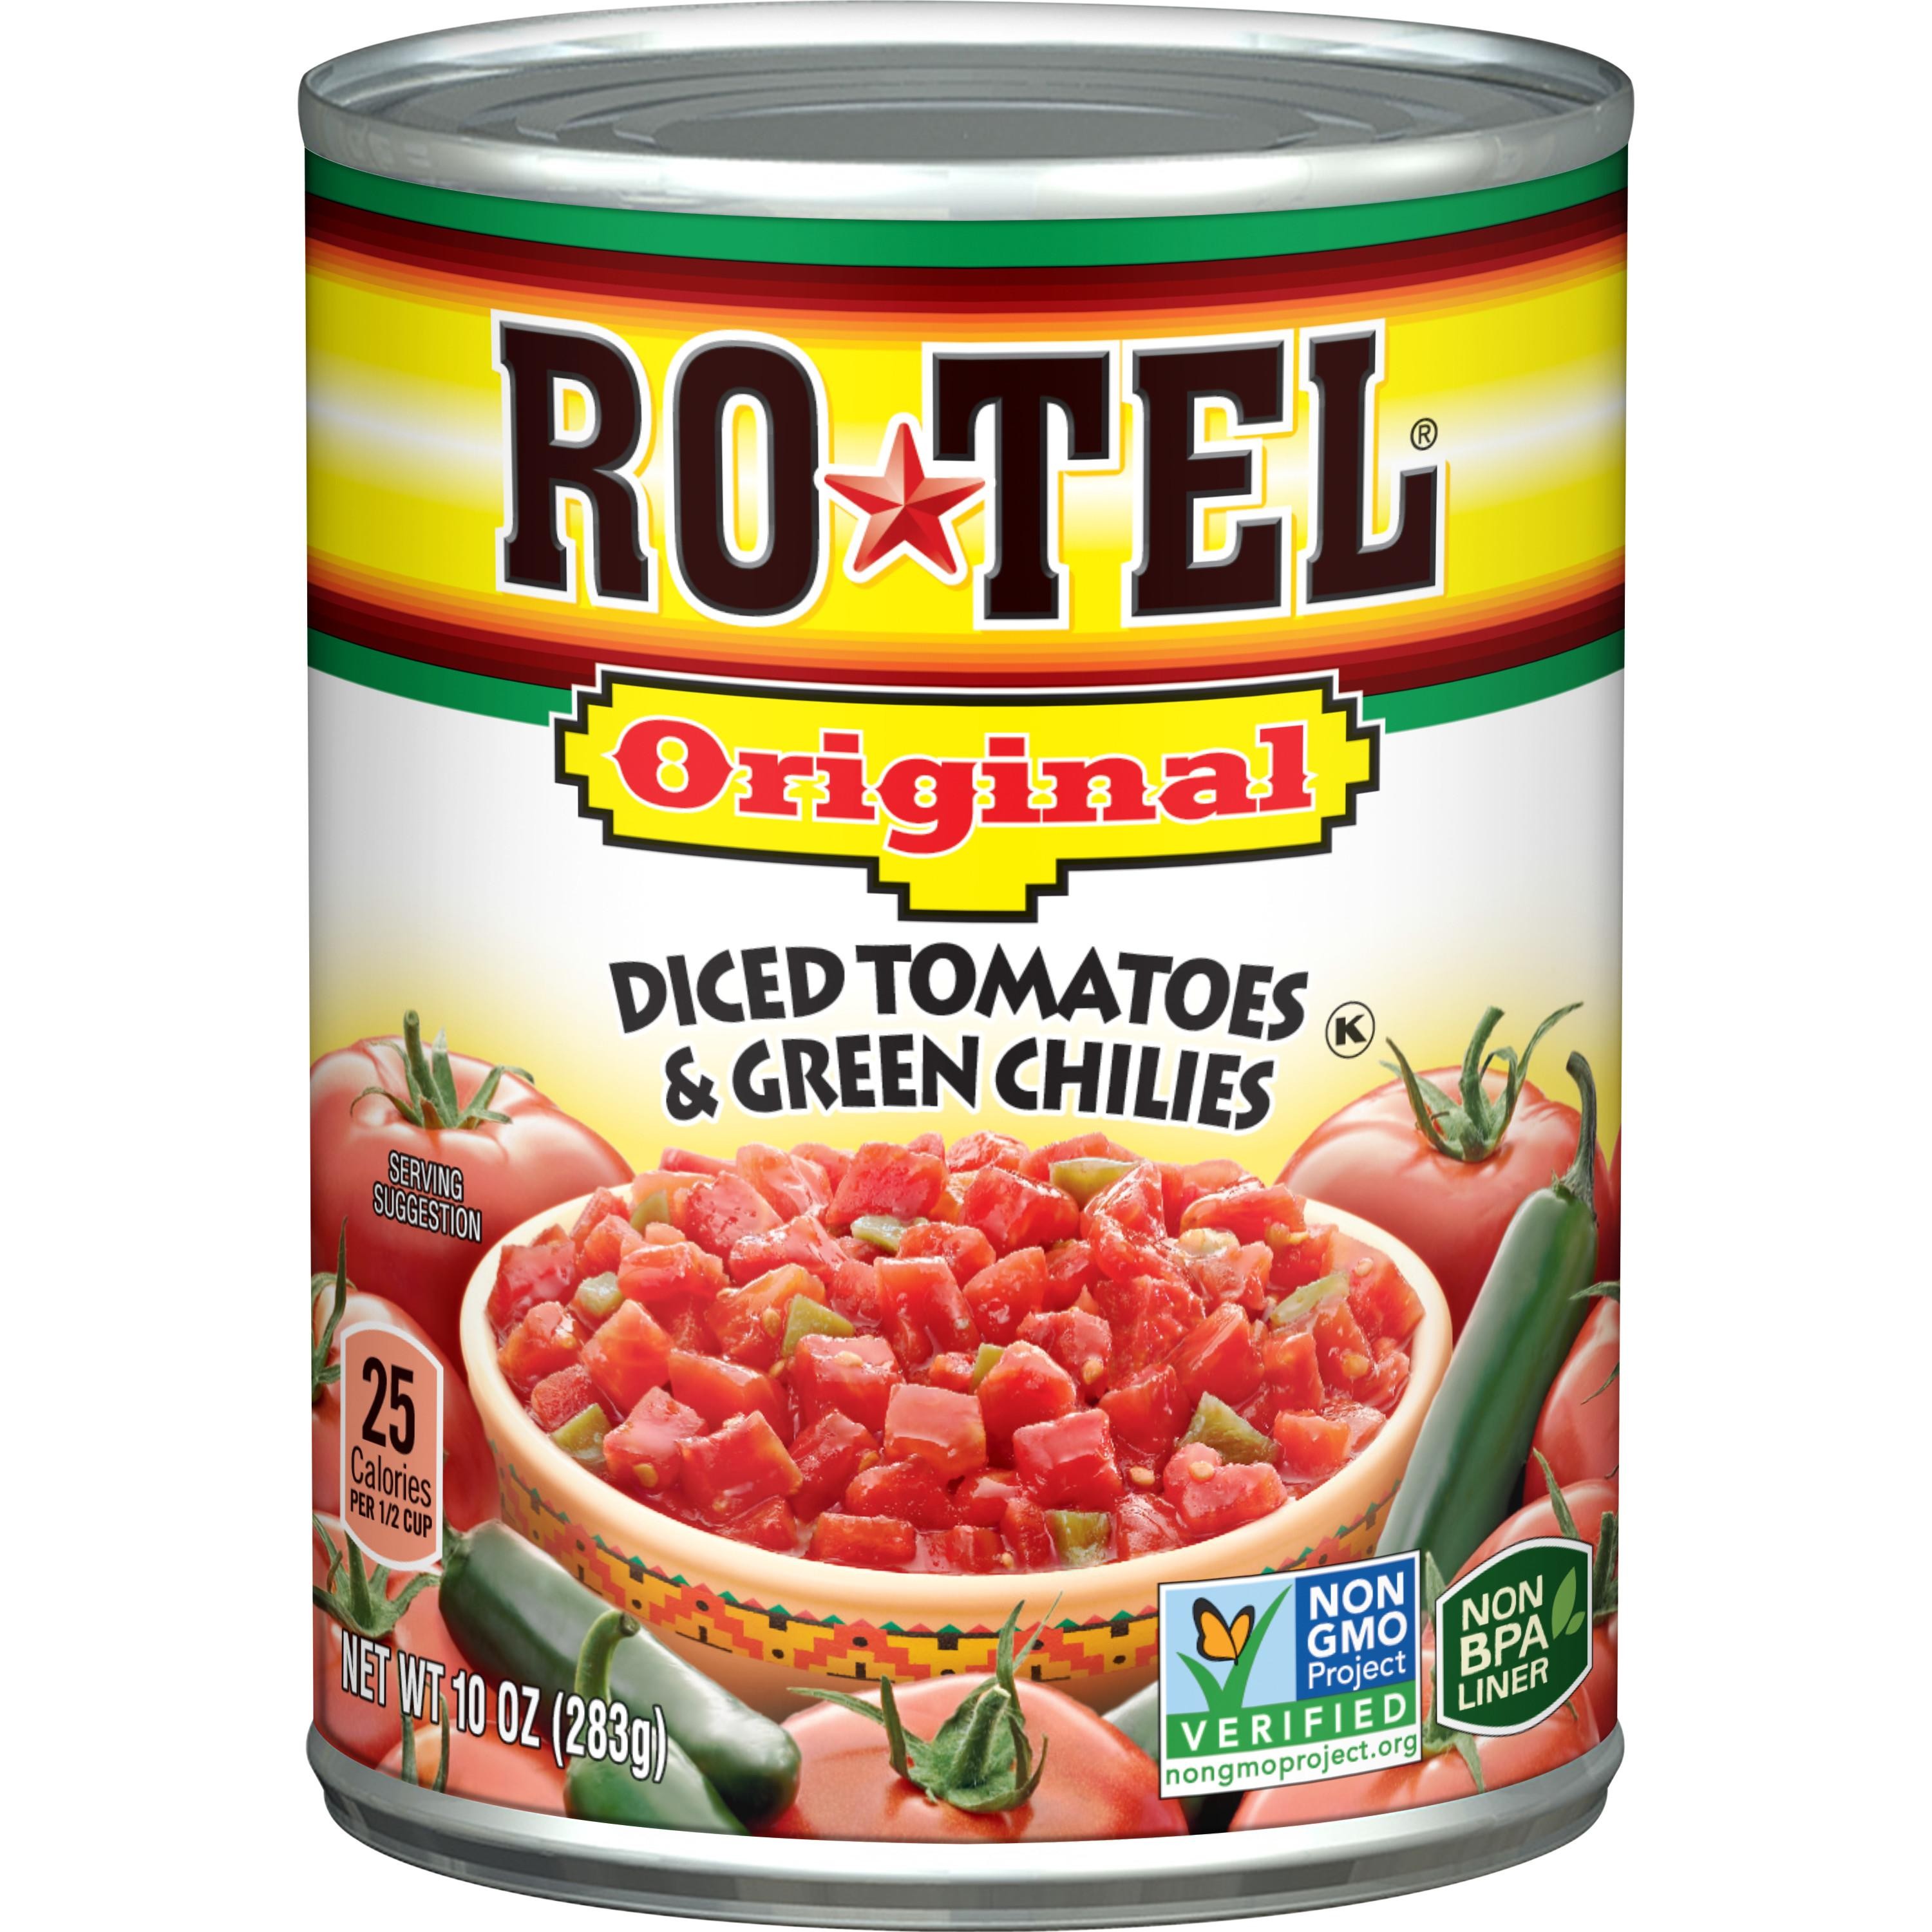 Rotel Diced Tomatoes & Green Chilies Original - 10.0 Oz